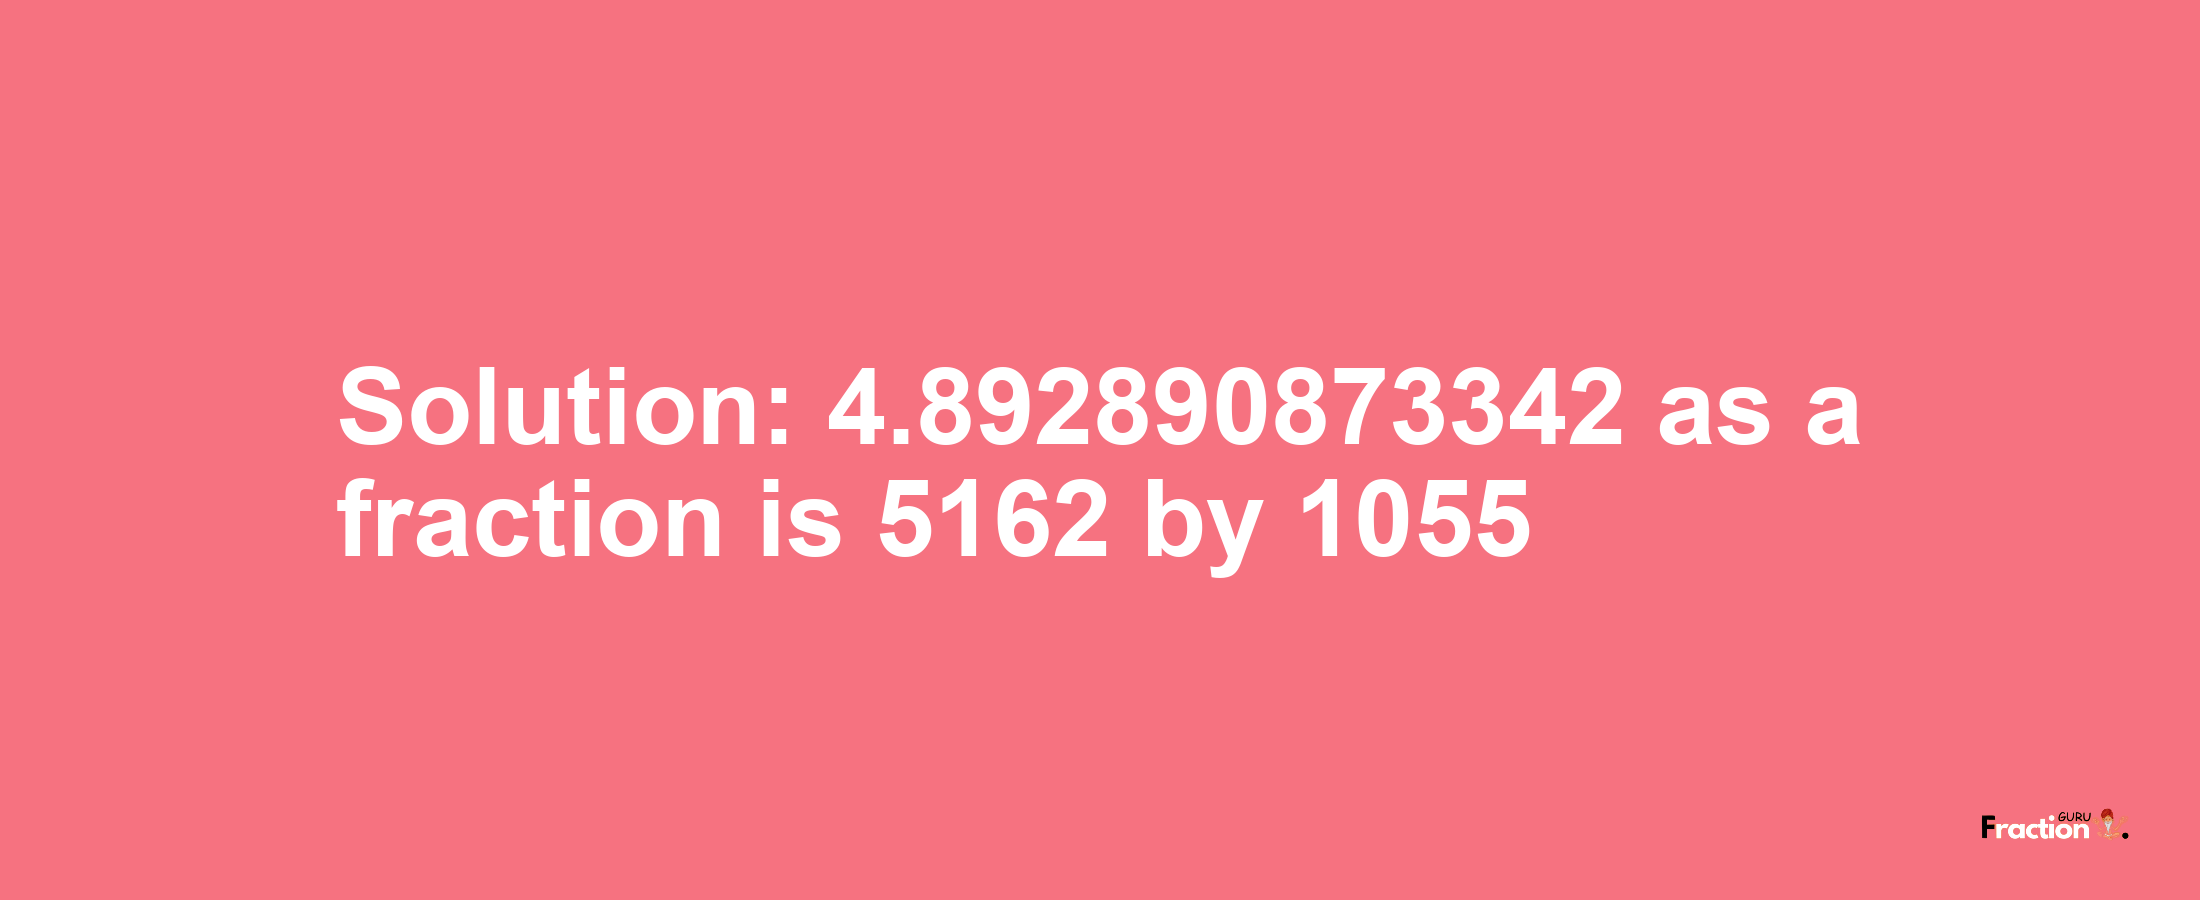 Solution:4.892890873342 as a fraction is 5162/1055